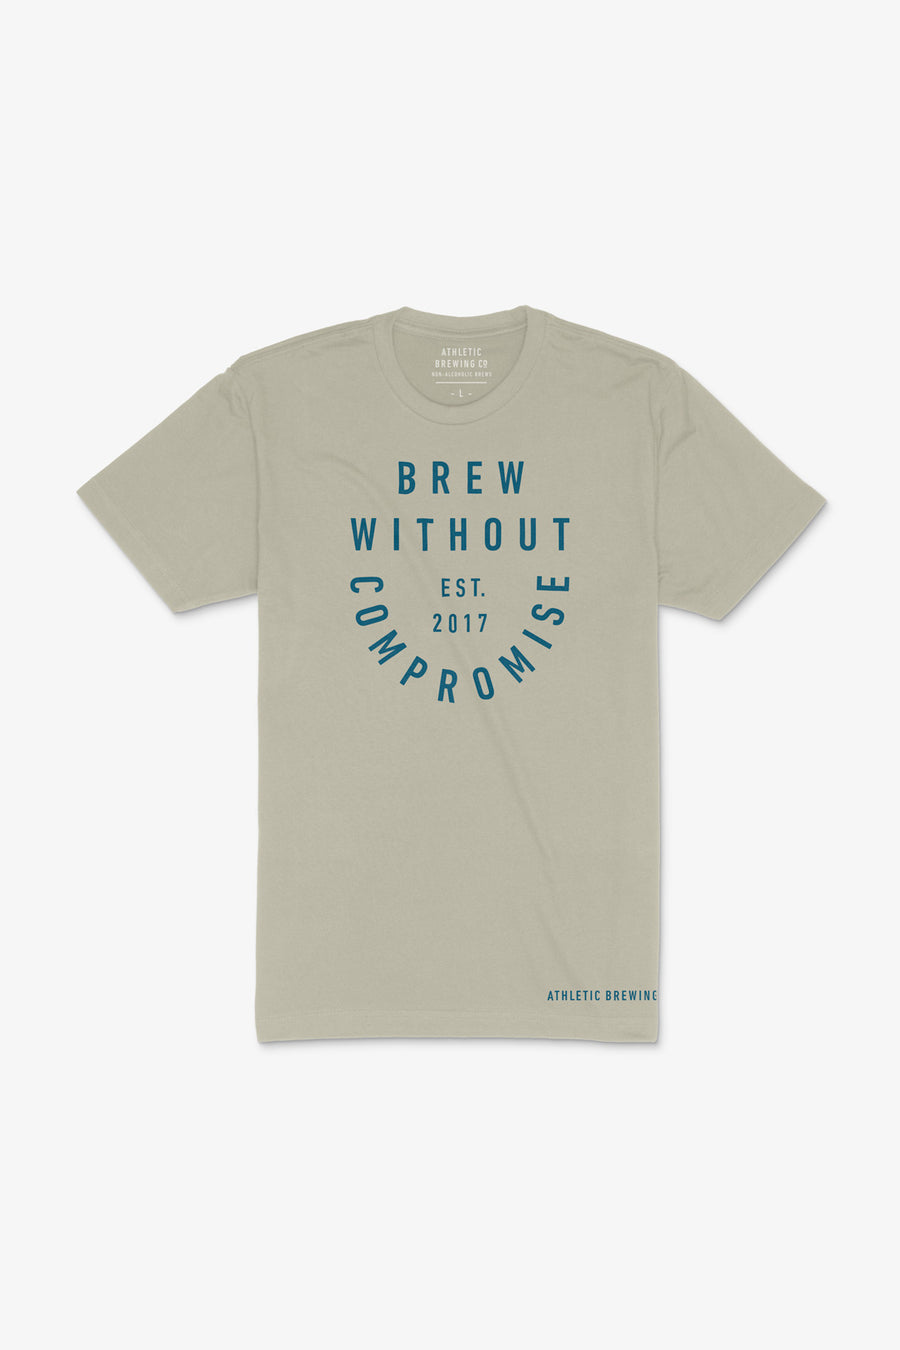 Tan Brew Without Compromise T-Shirt - Unisex